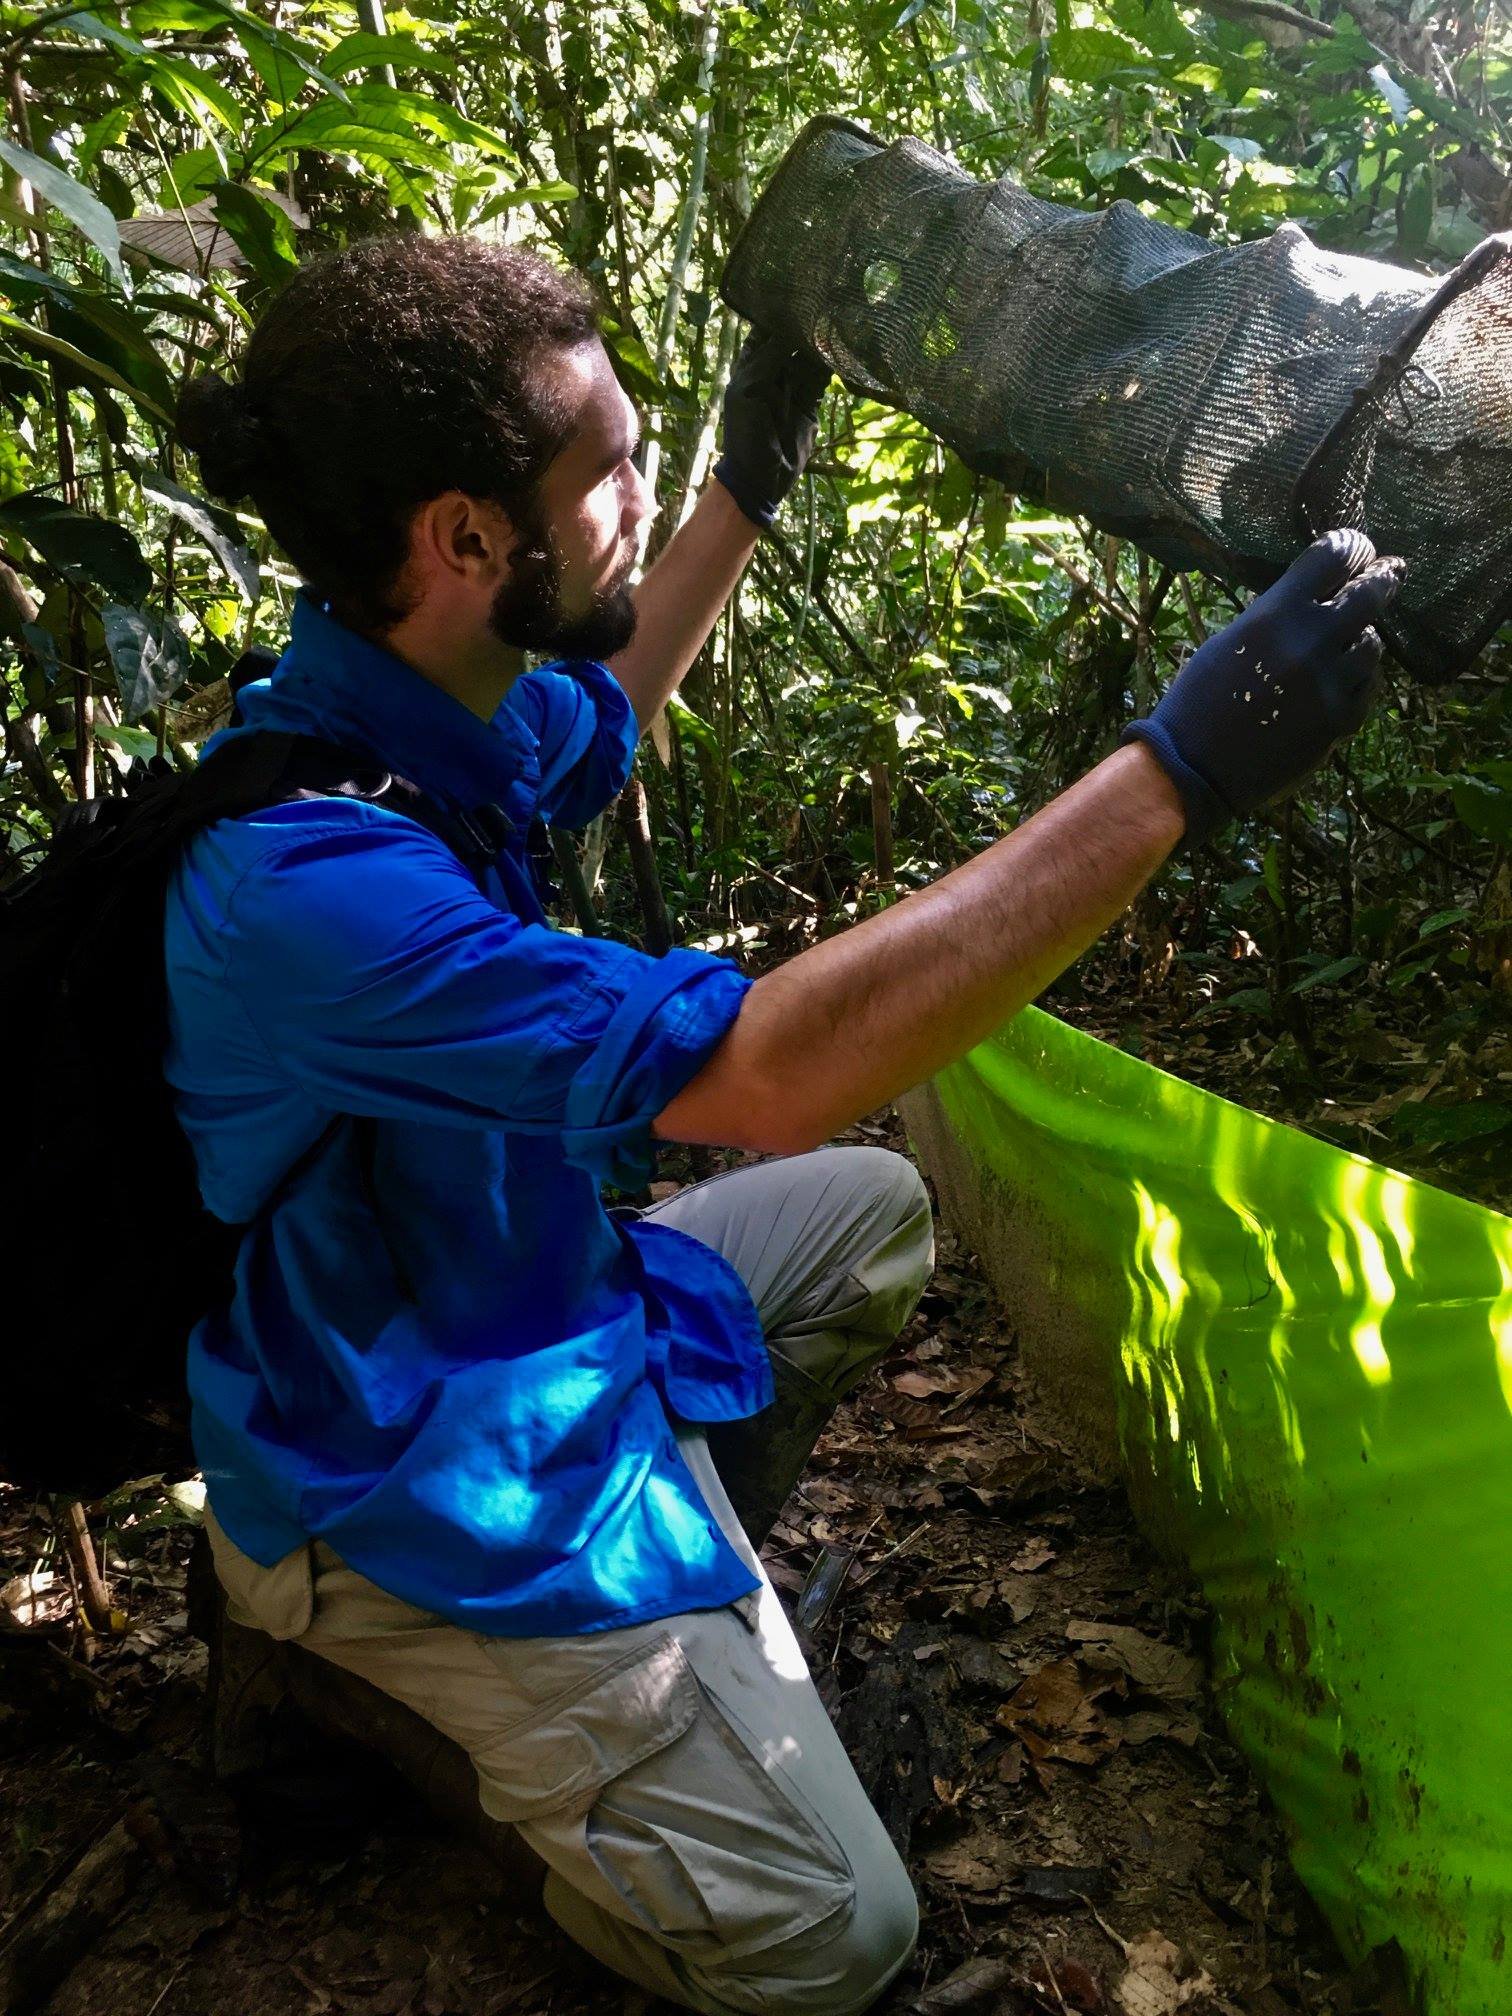    Greg inspecting a funnel trap used to capture cryptic herps in the Peruvian Amazon.   